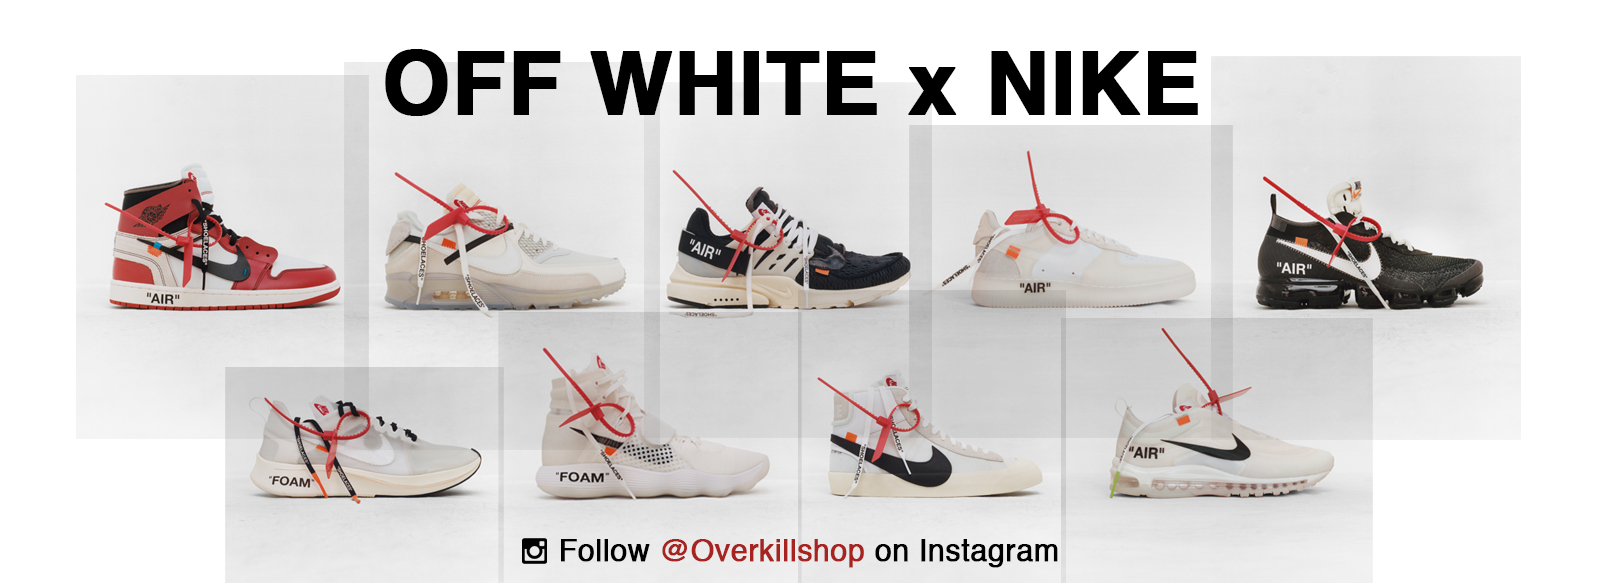 nike x off white releases